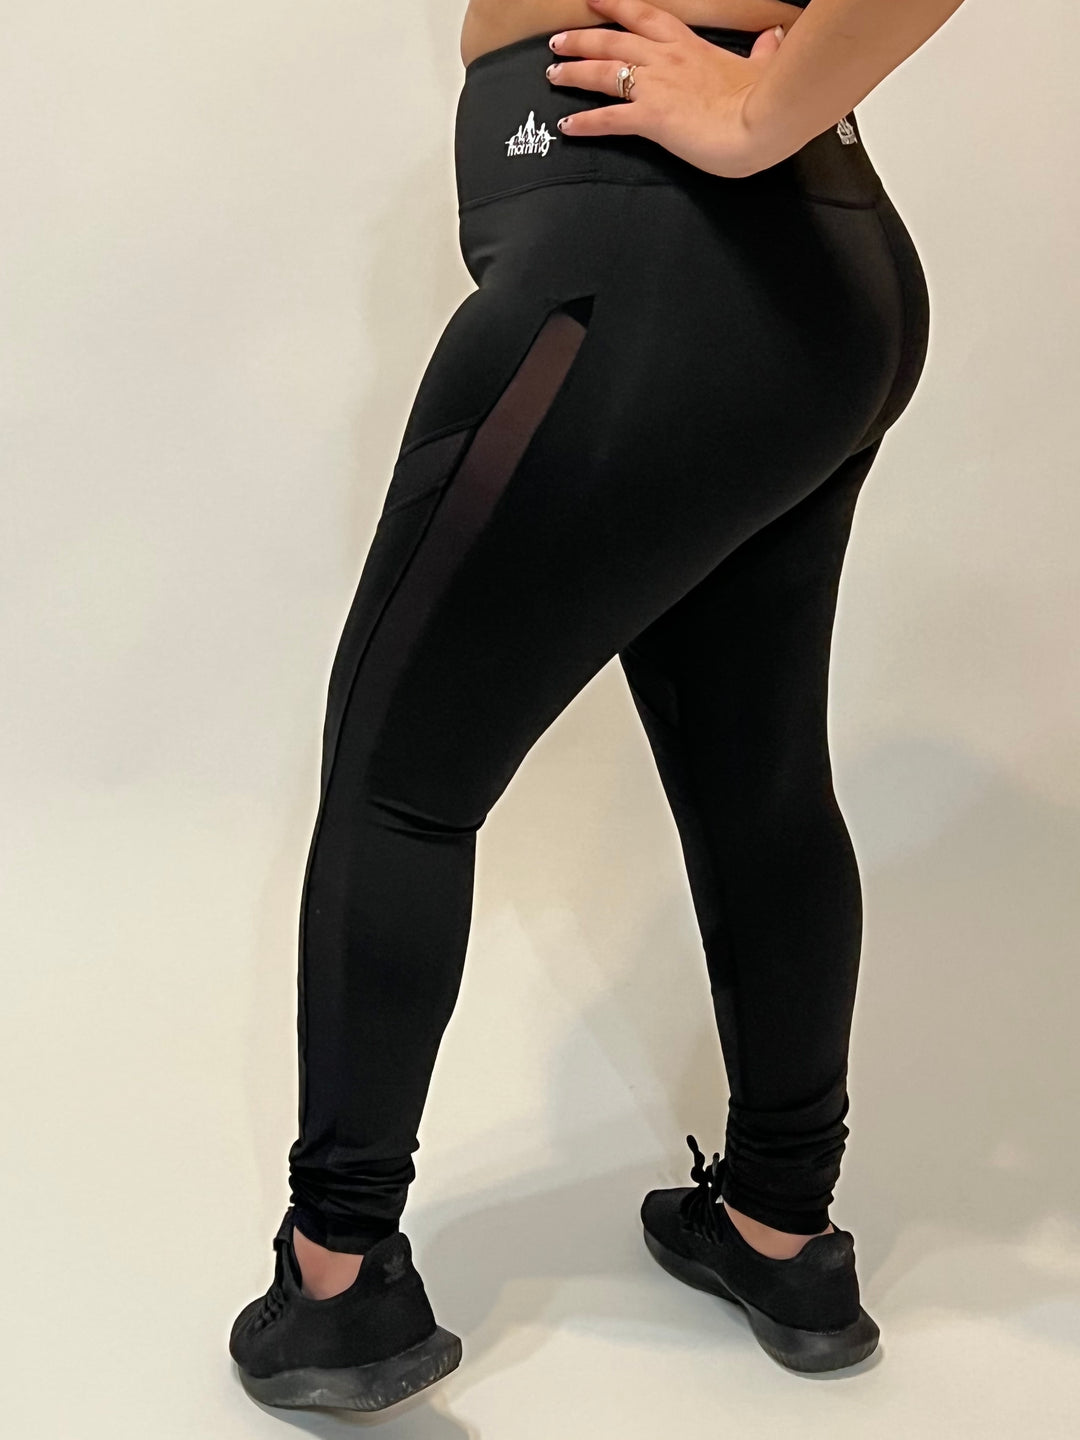 ALONG FIT Women's Mesh Yoga Leggings with Side Cameroon